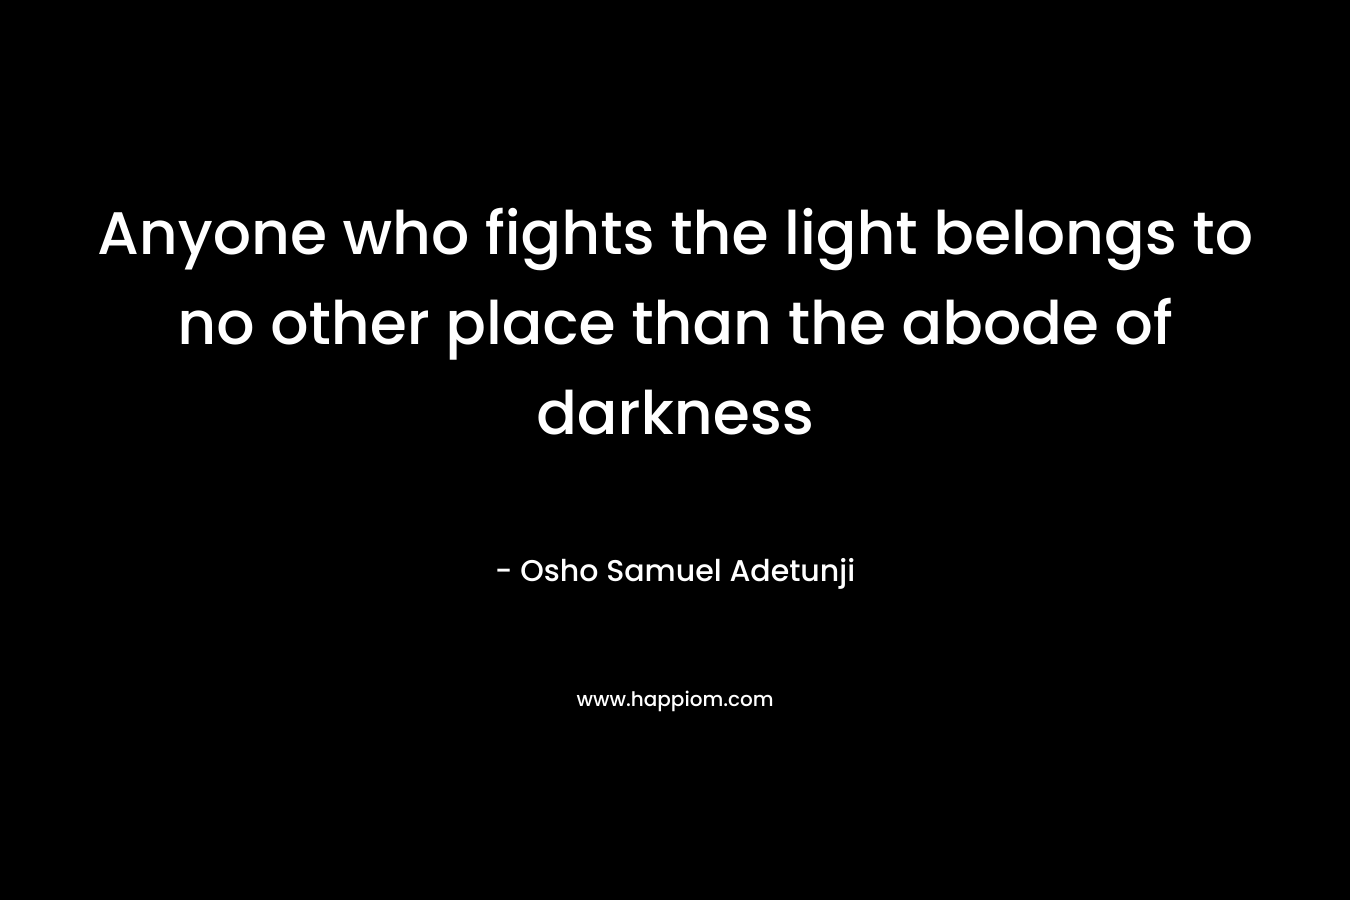 Anyone who fights the light belongs to no other place than the abode of darkness